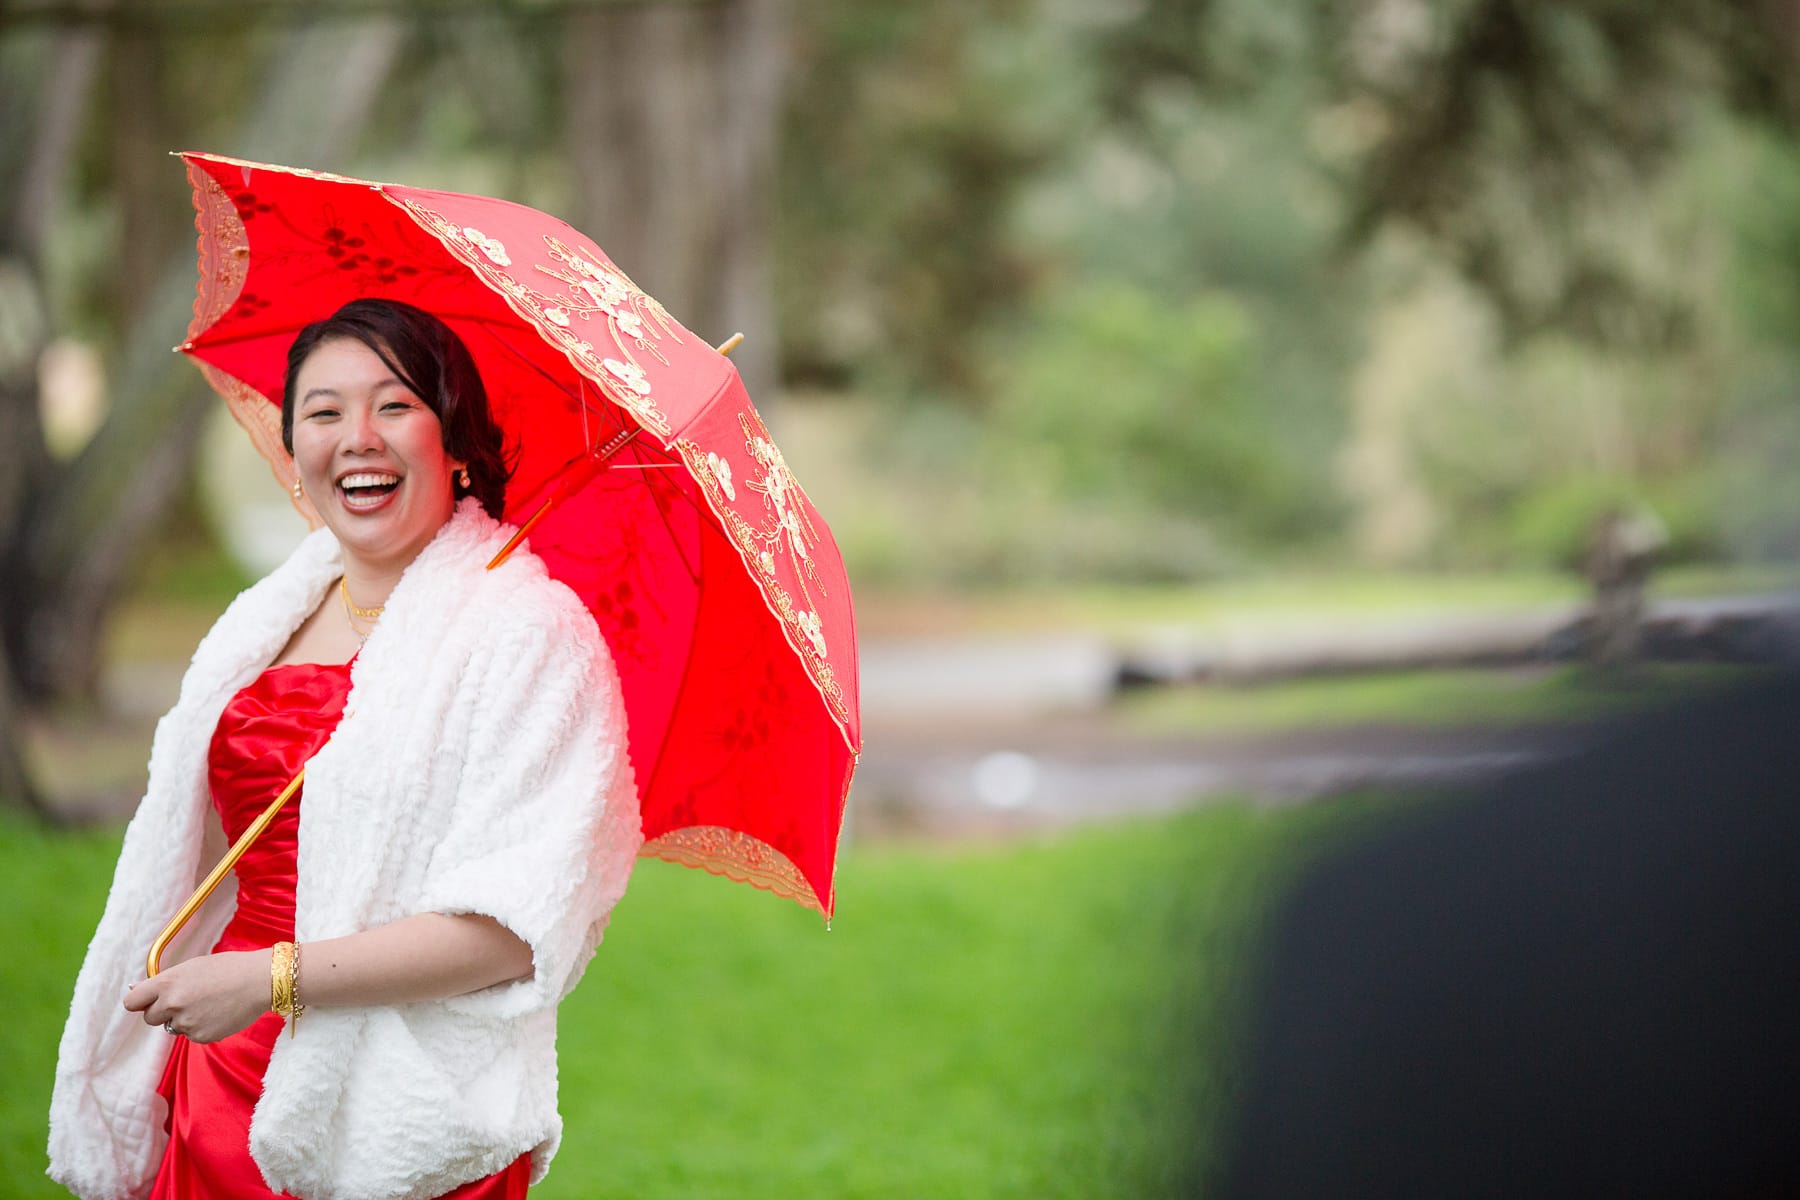 Bride in red dress and white shawl with red umbrella smiling while looking at her groom